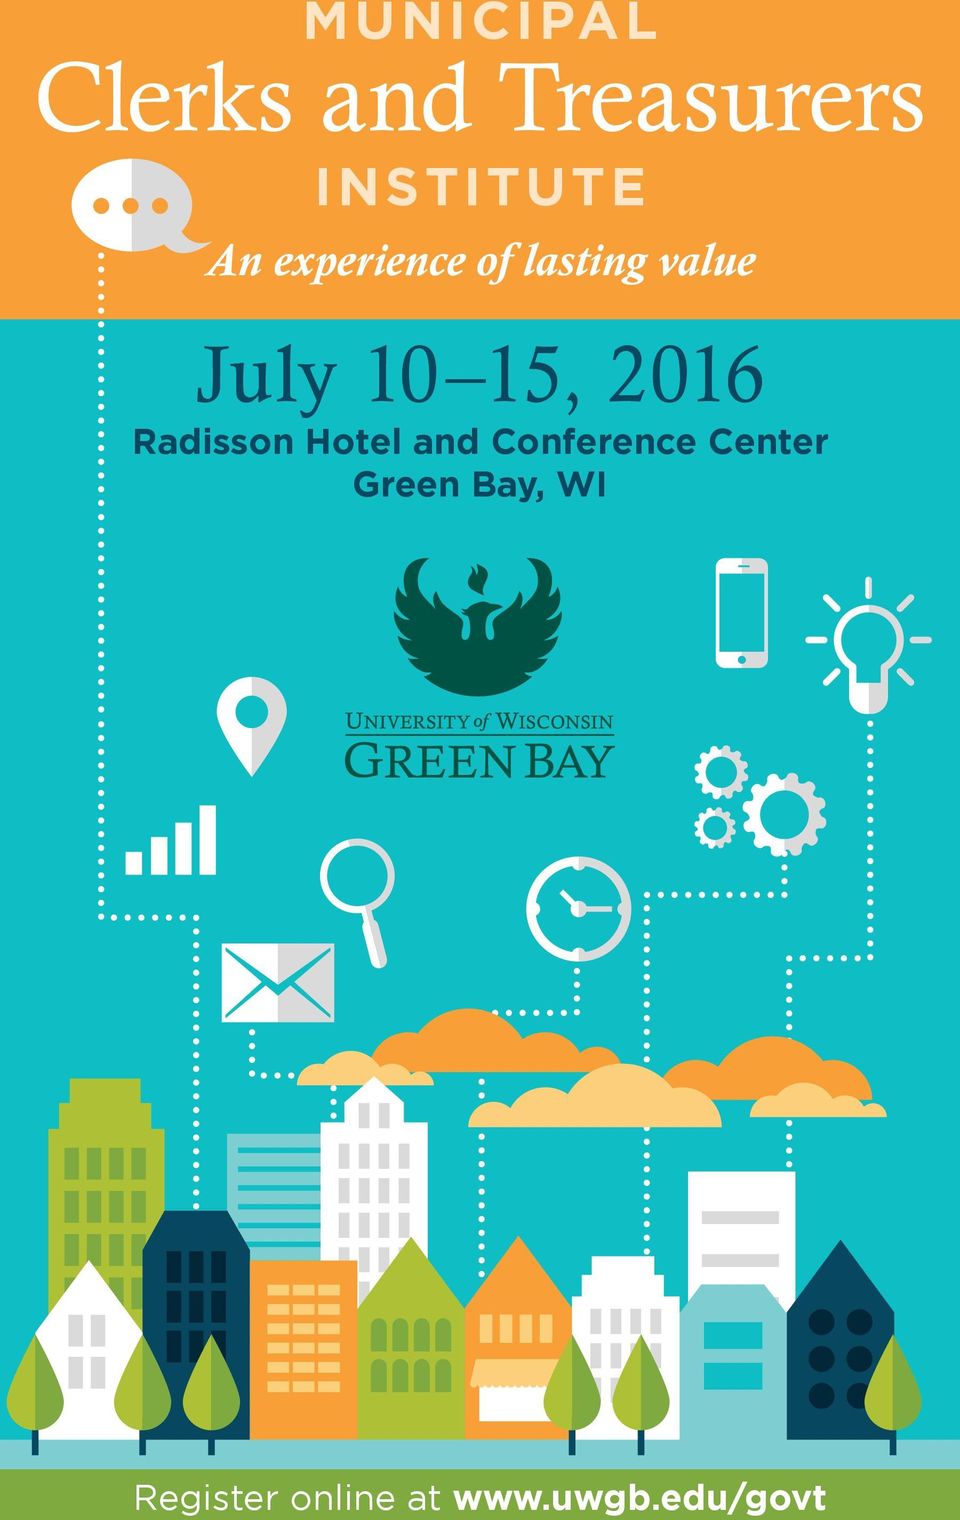 Radisson Hotel and Conference Center Green